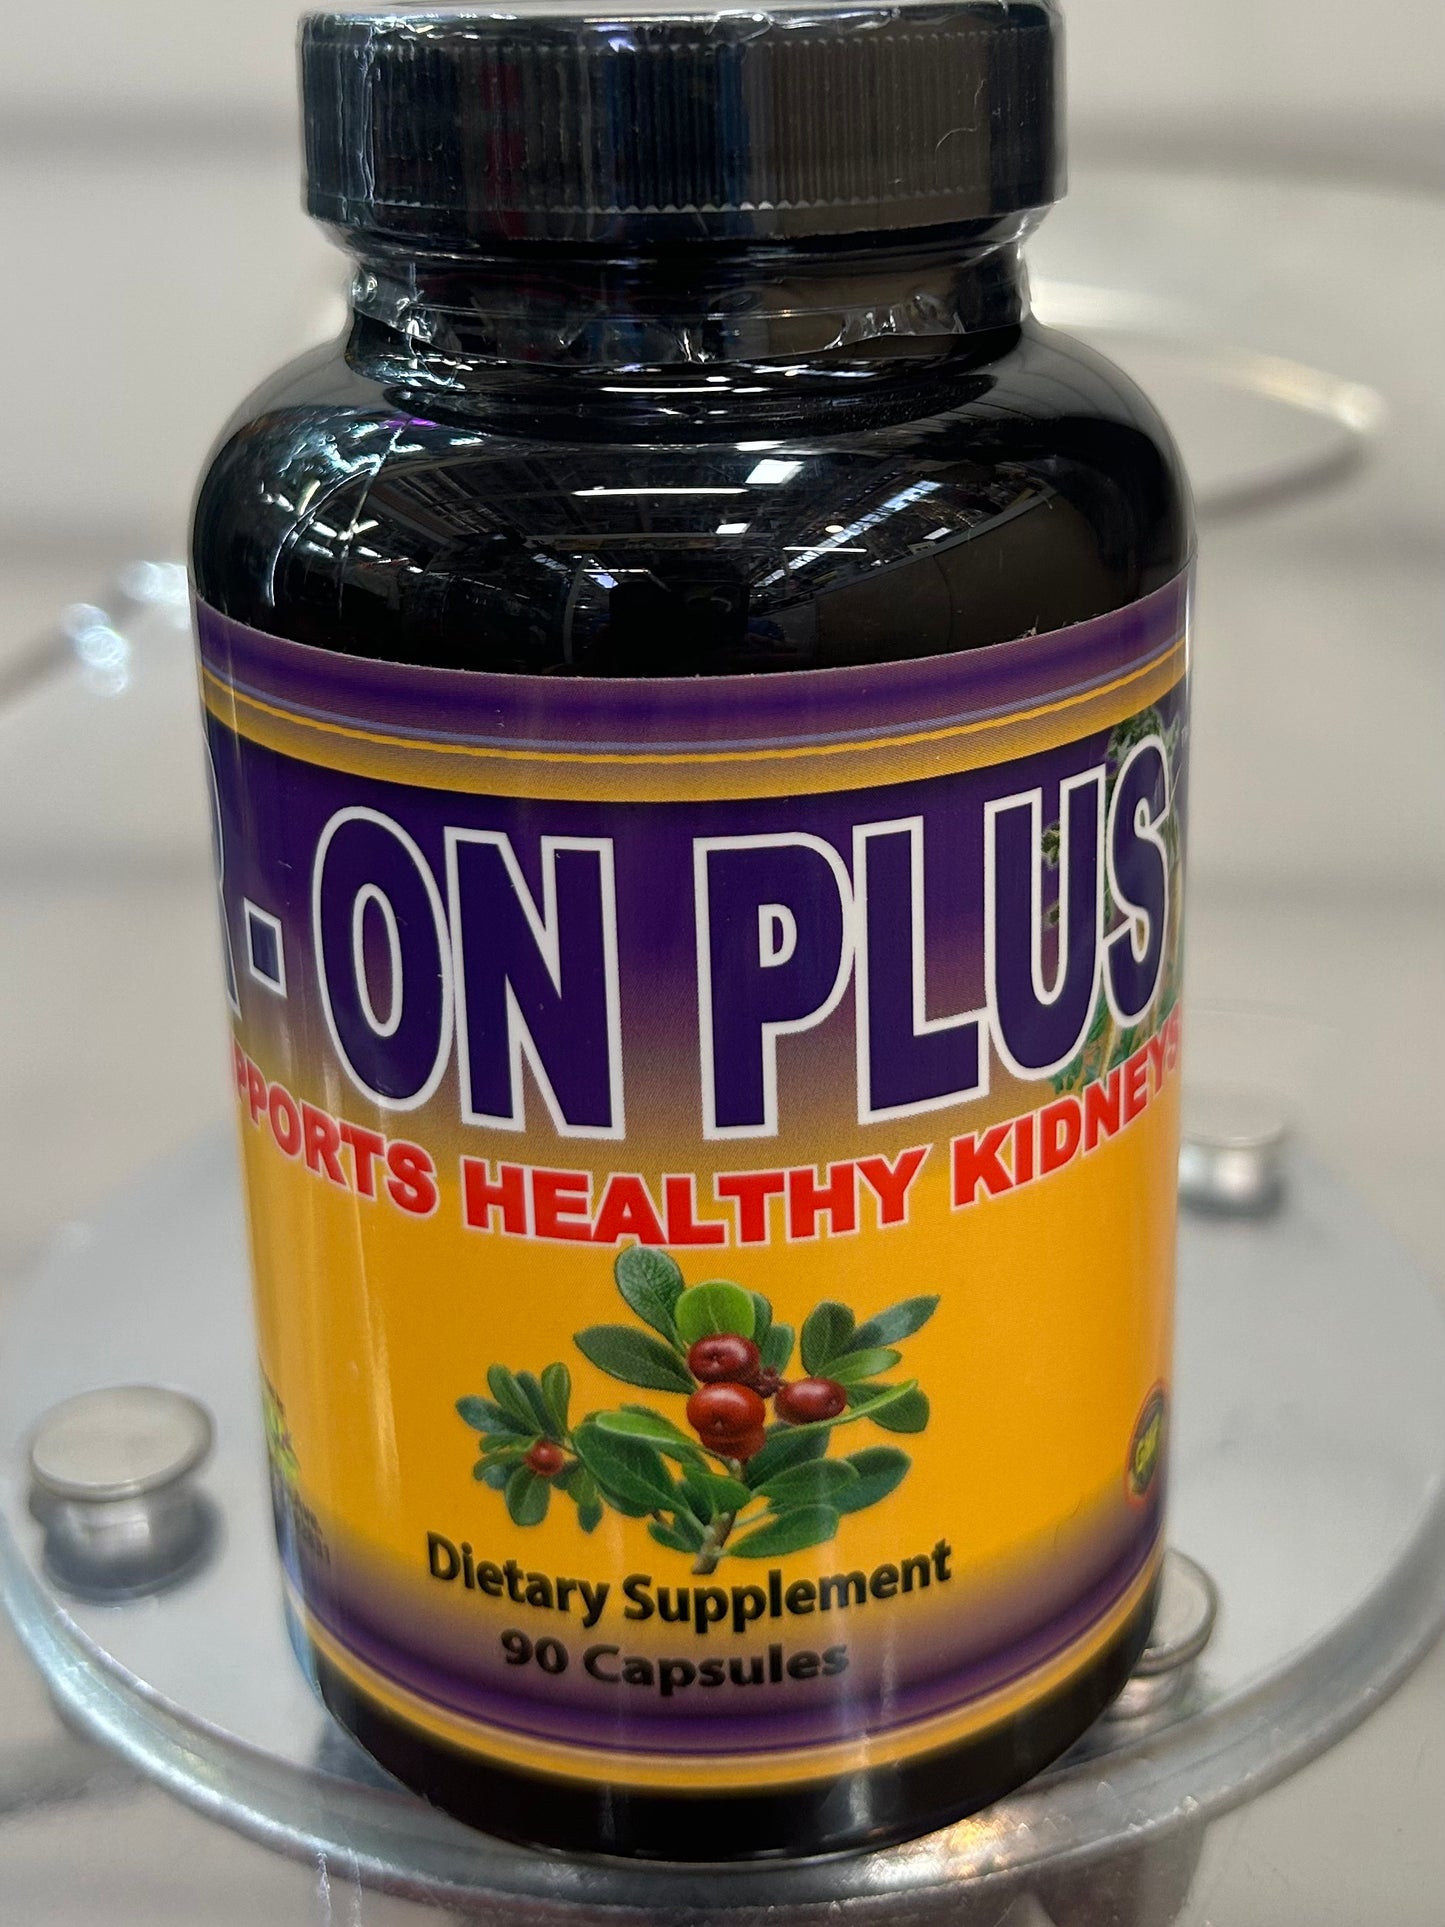 R-ON Plus supports healthy kidneys 90 capsules